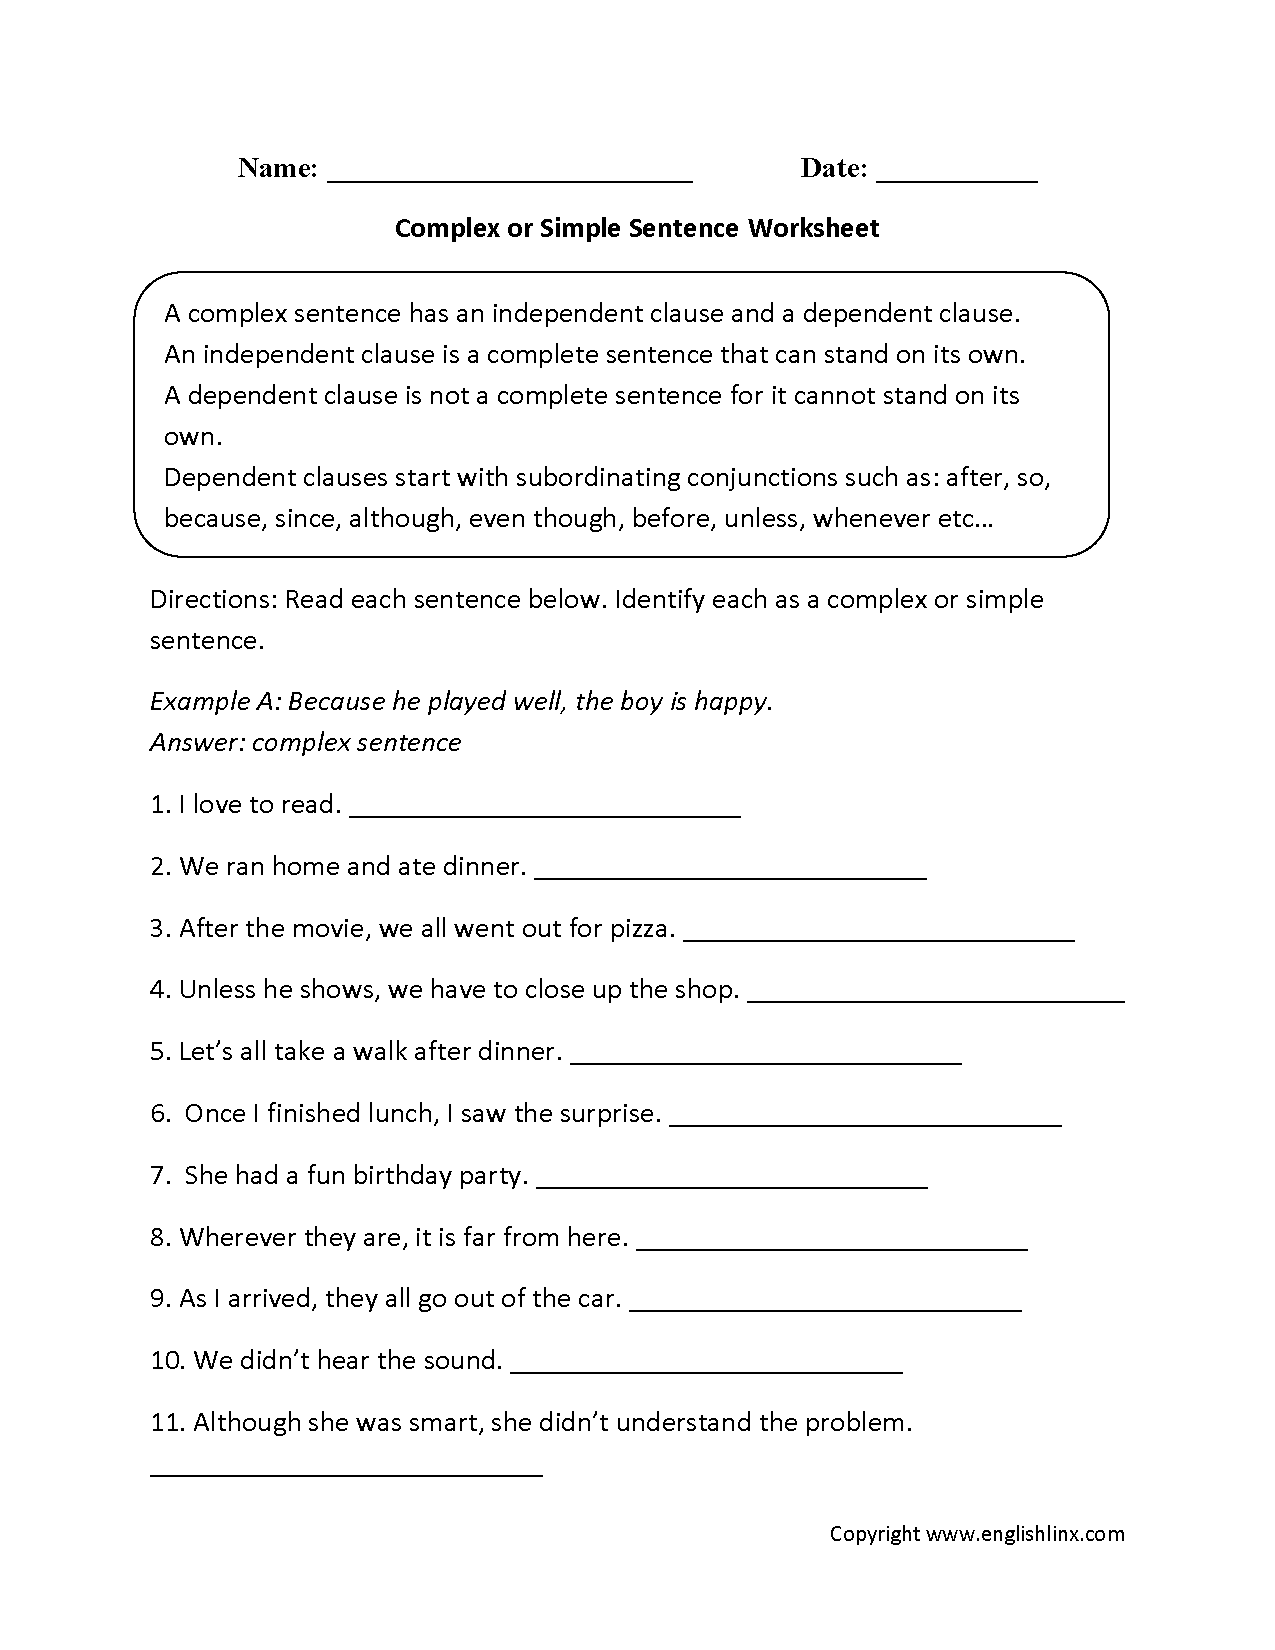 Simple Compound and Complex Sentences Worksheet Image